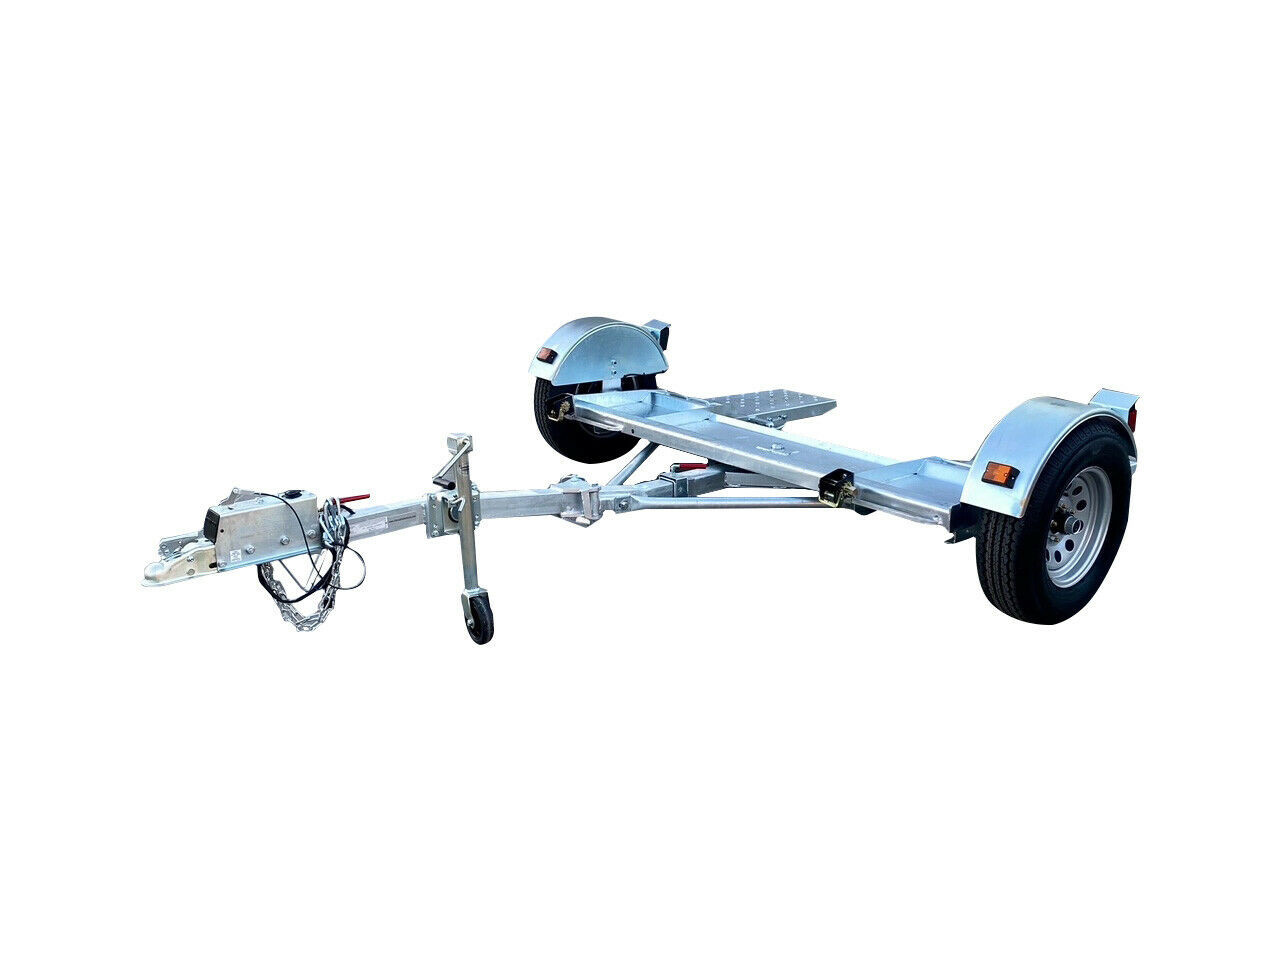 Premium Stow and Go Folding Car Tow Dolly with Surge Brakes